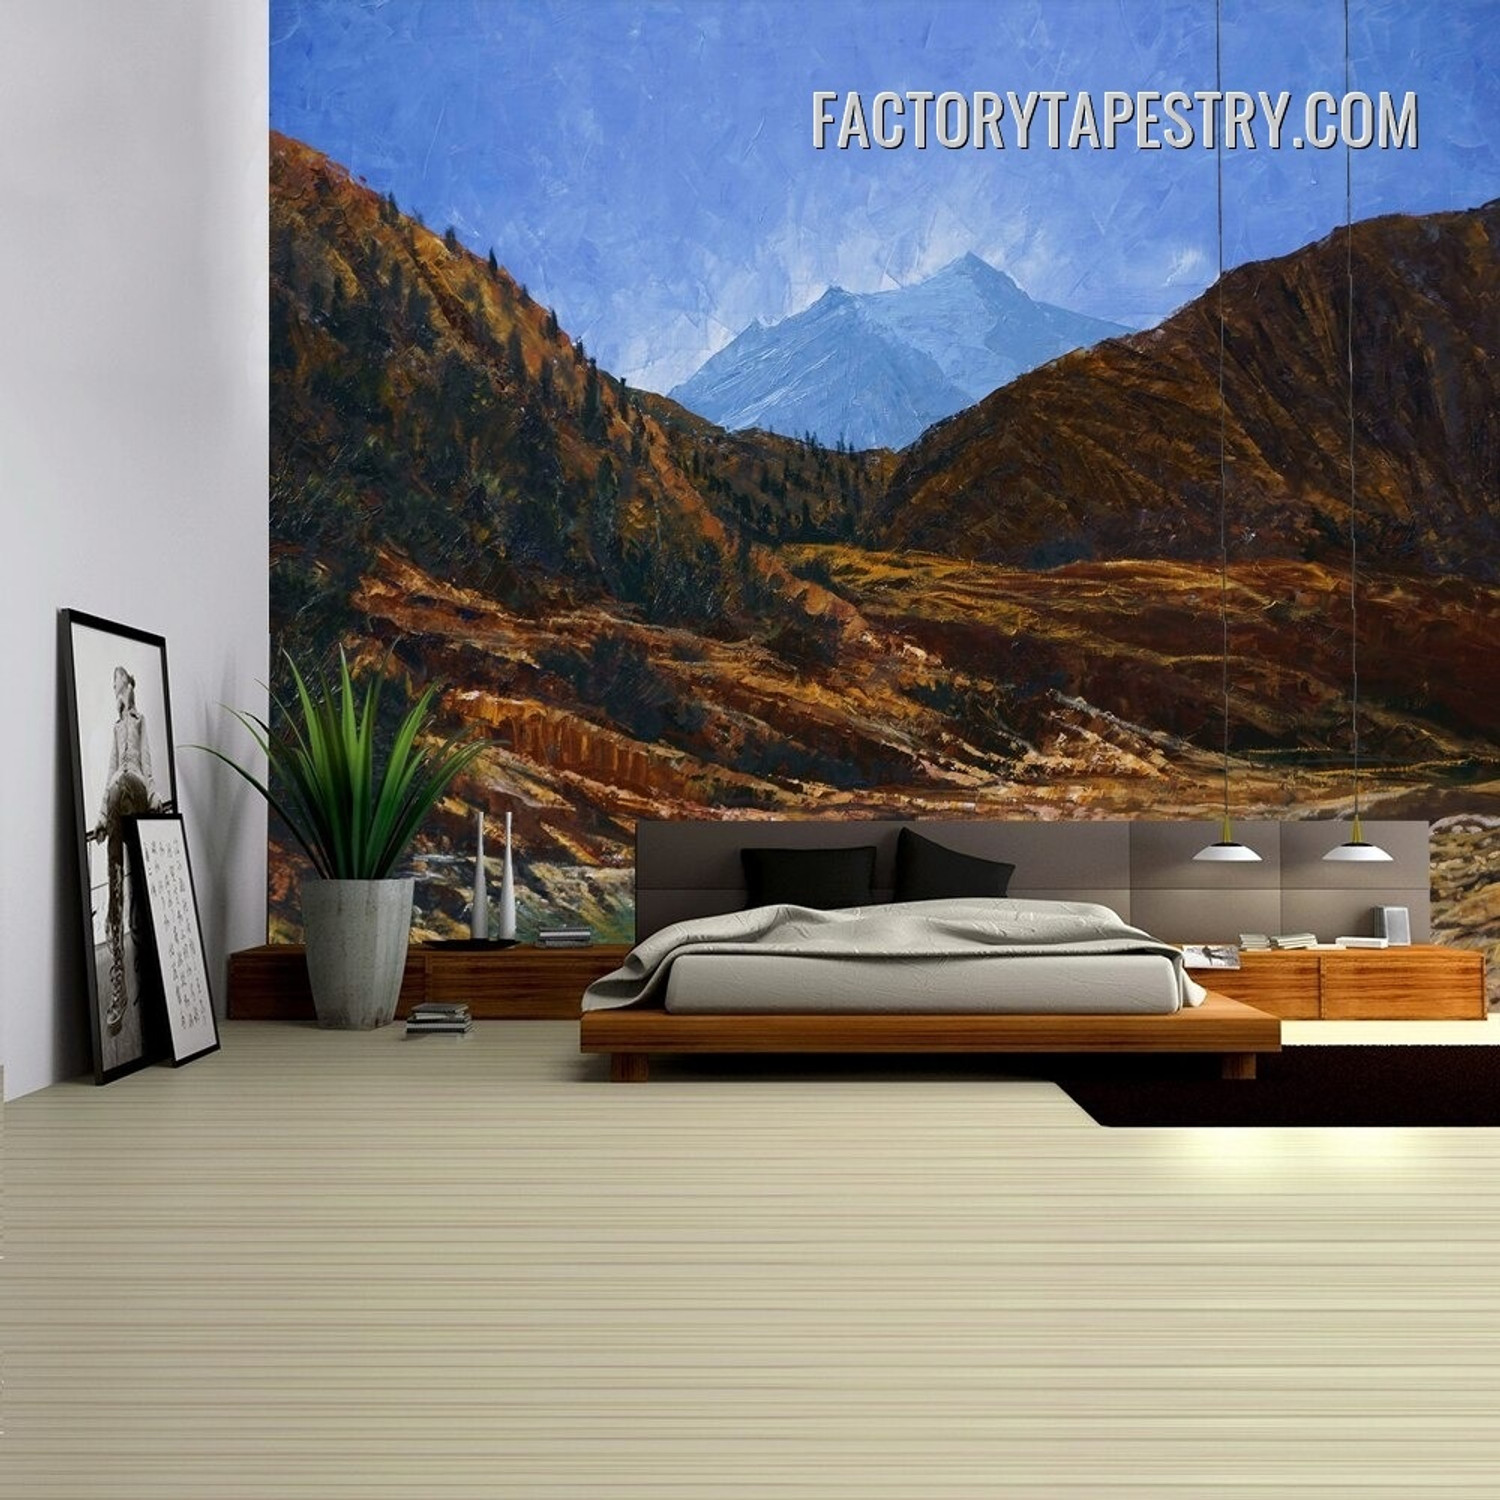 Snow Mountain View Nature Landscape Modern Wall Art Tapestry for Bedroom Dorm Home Decor